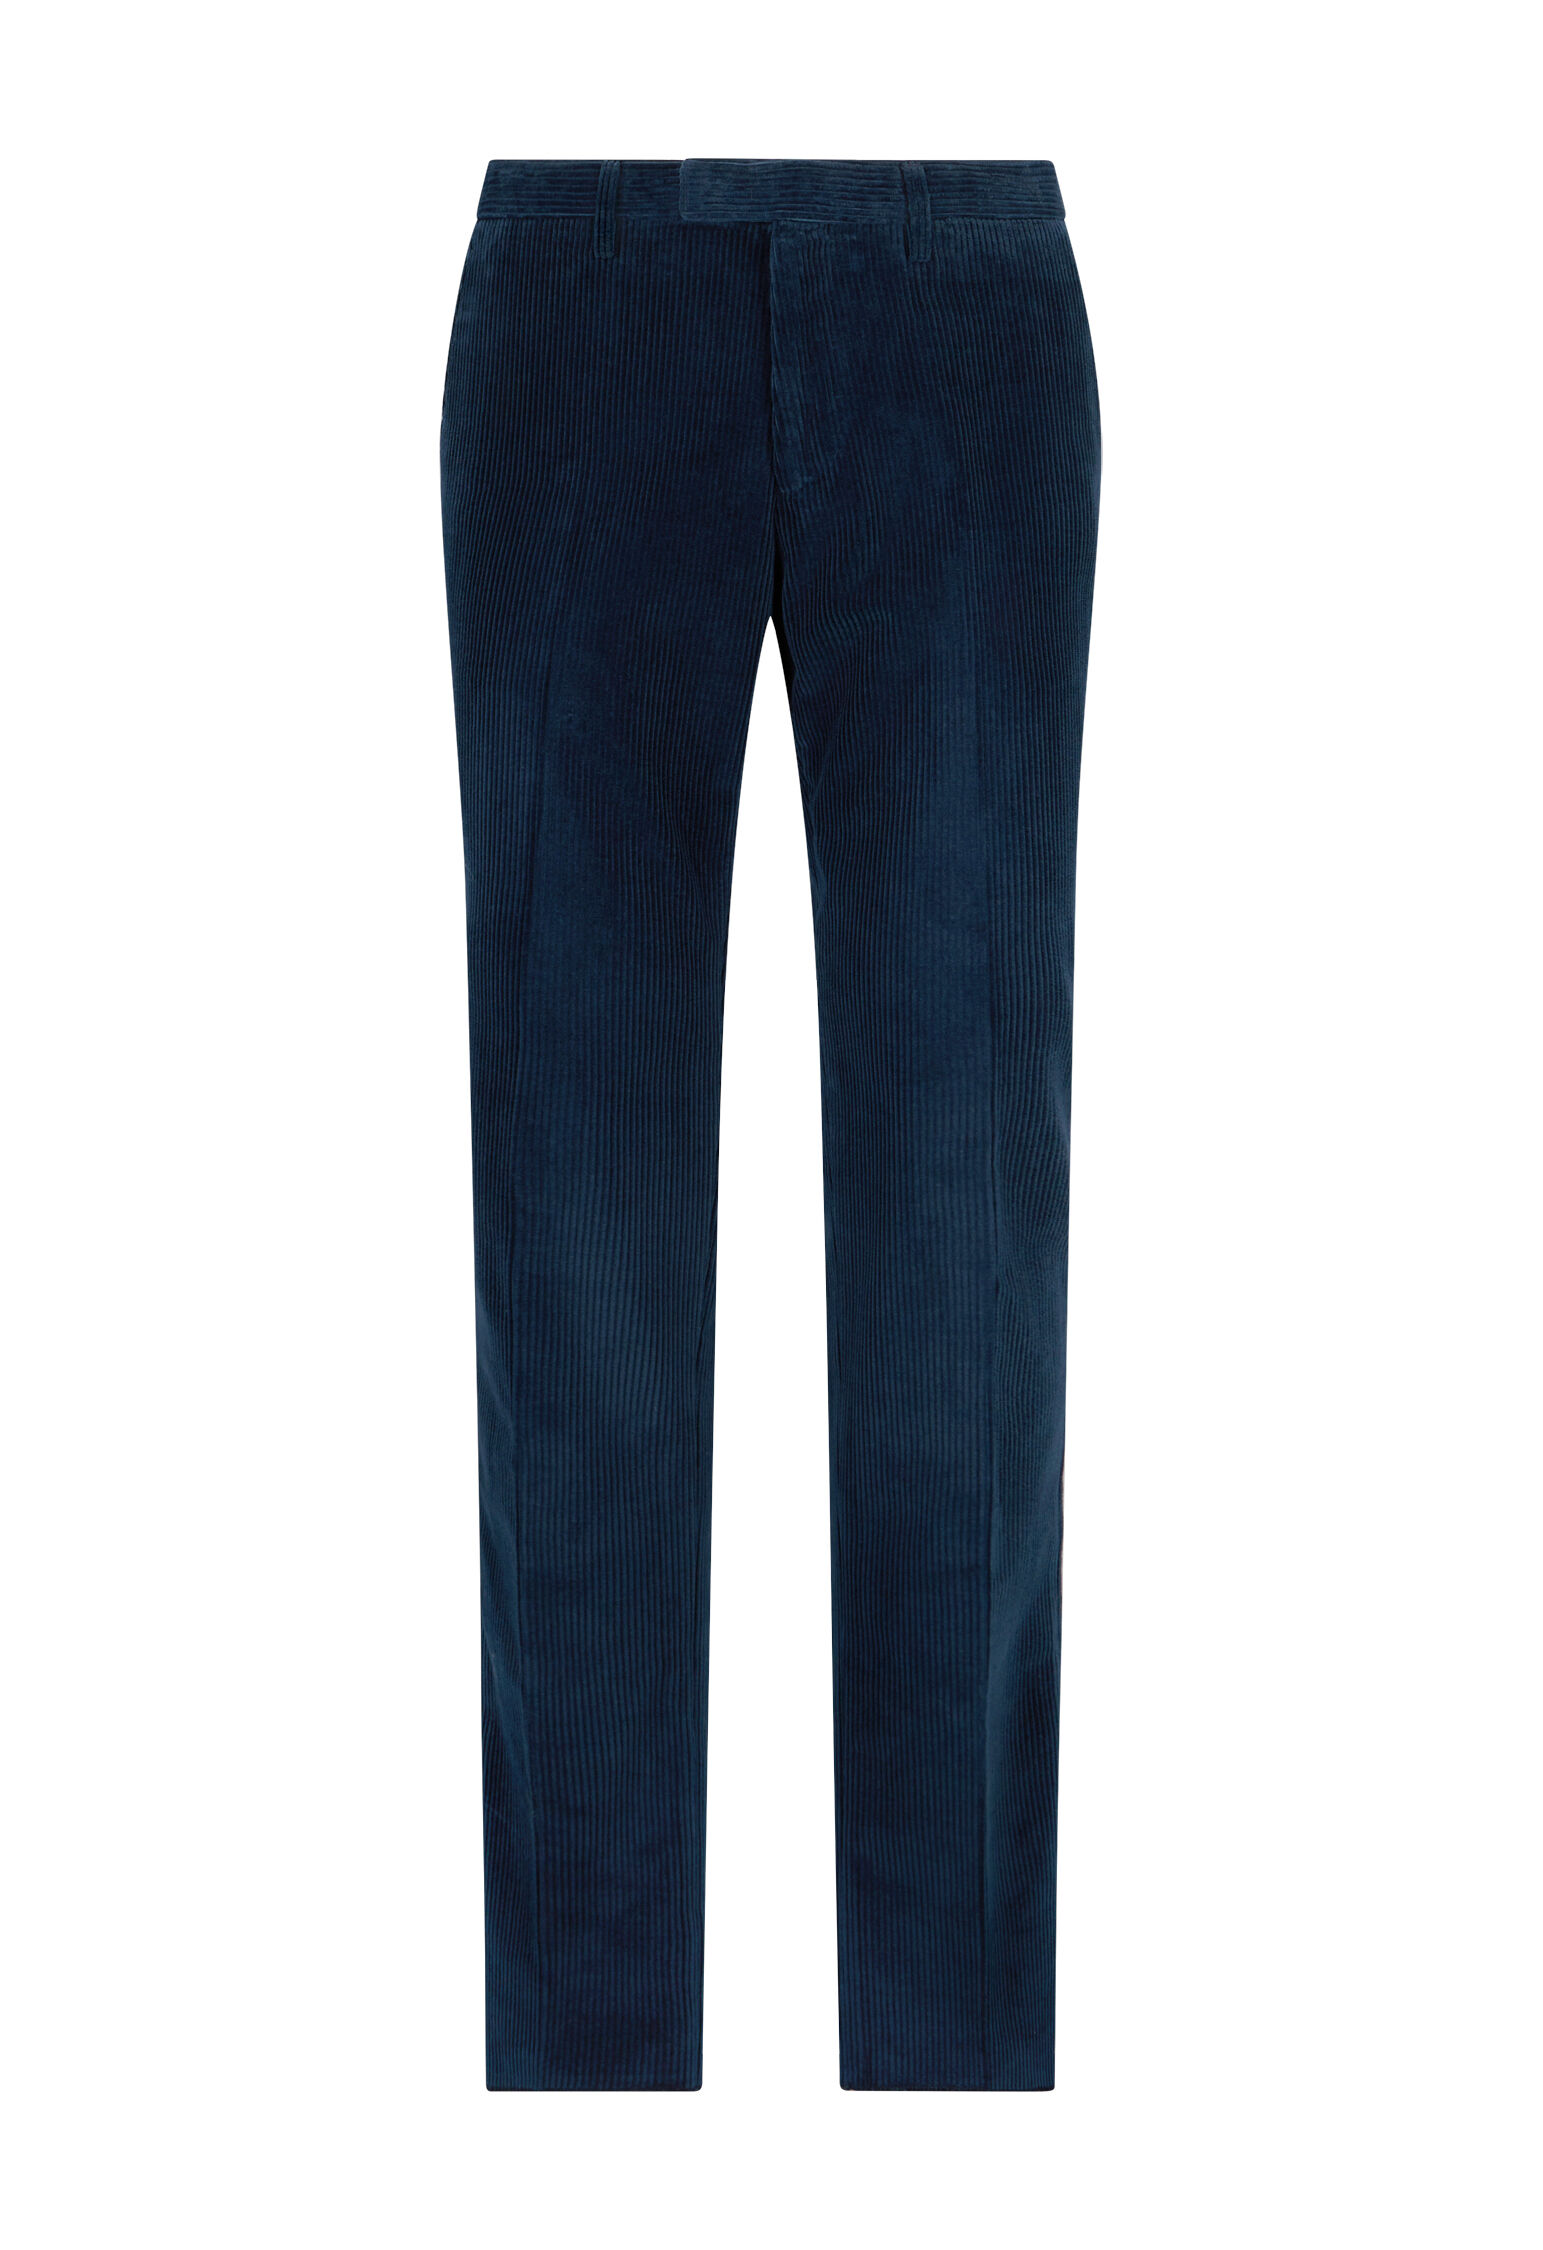 Carlyle Pant - Navy 8W Corduroy | Nepenthes New York